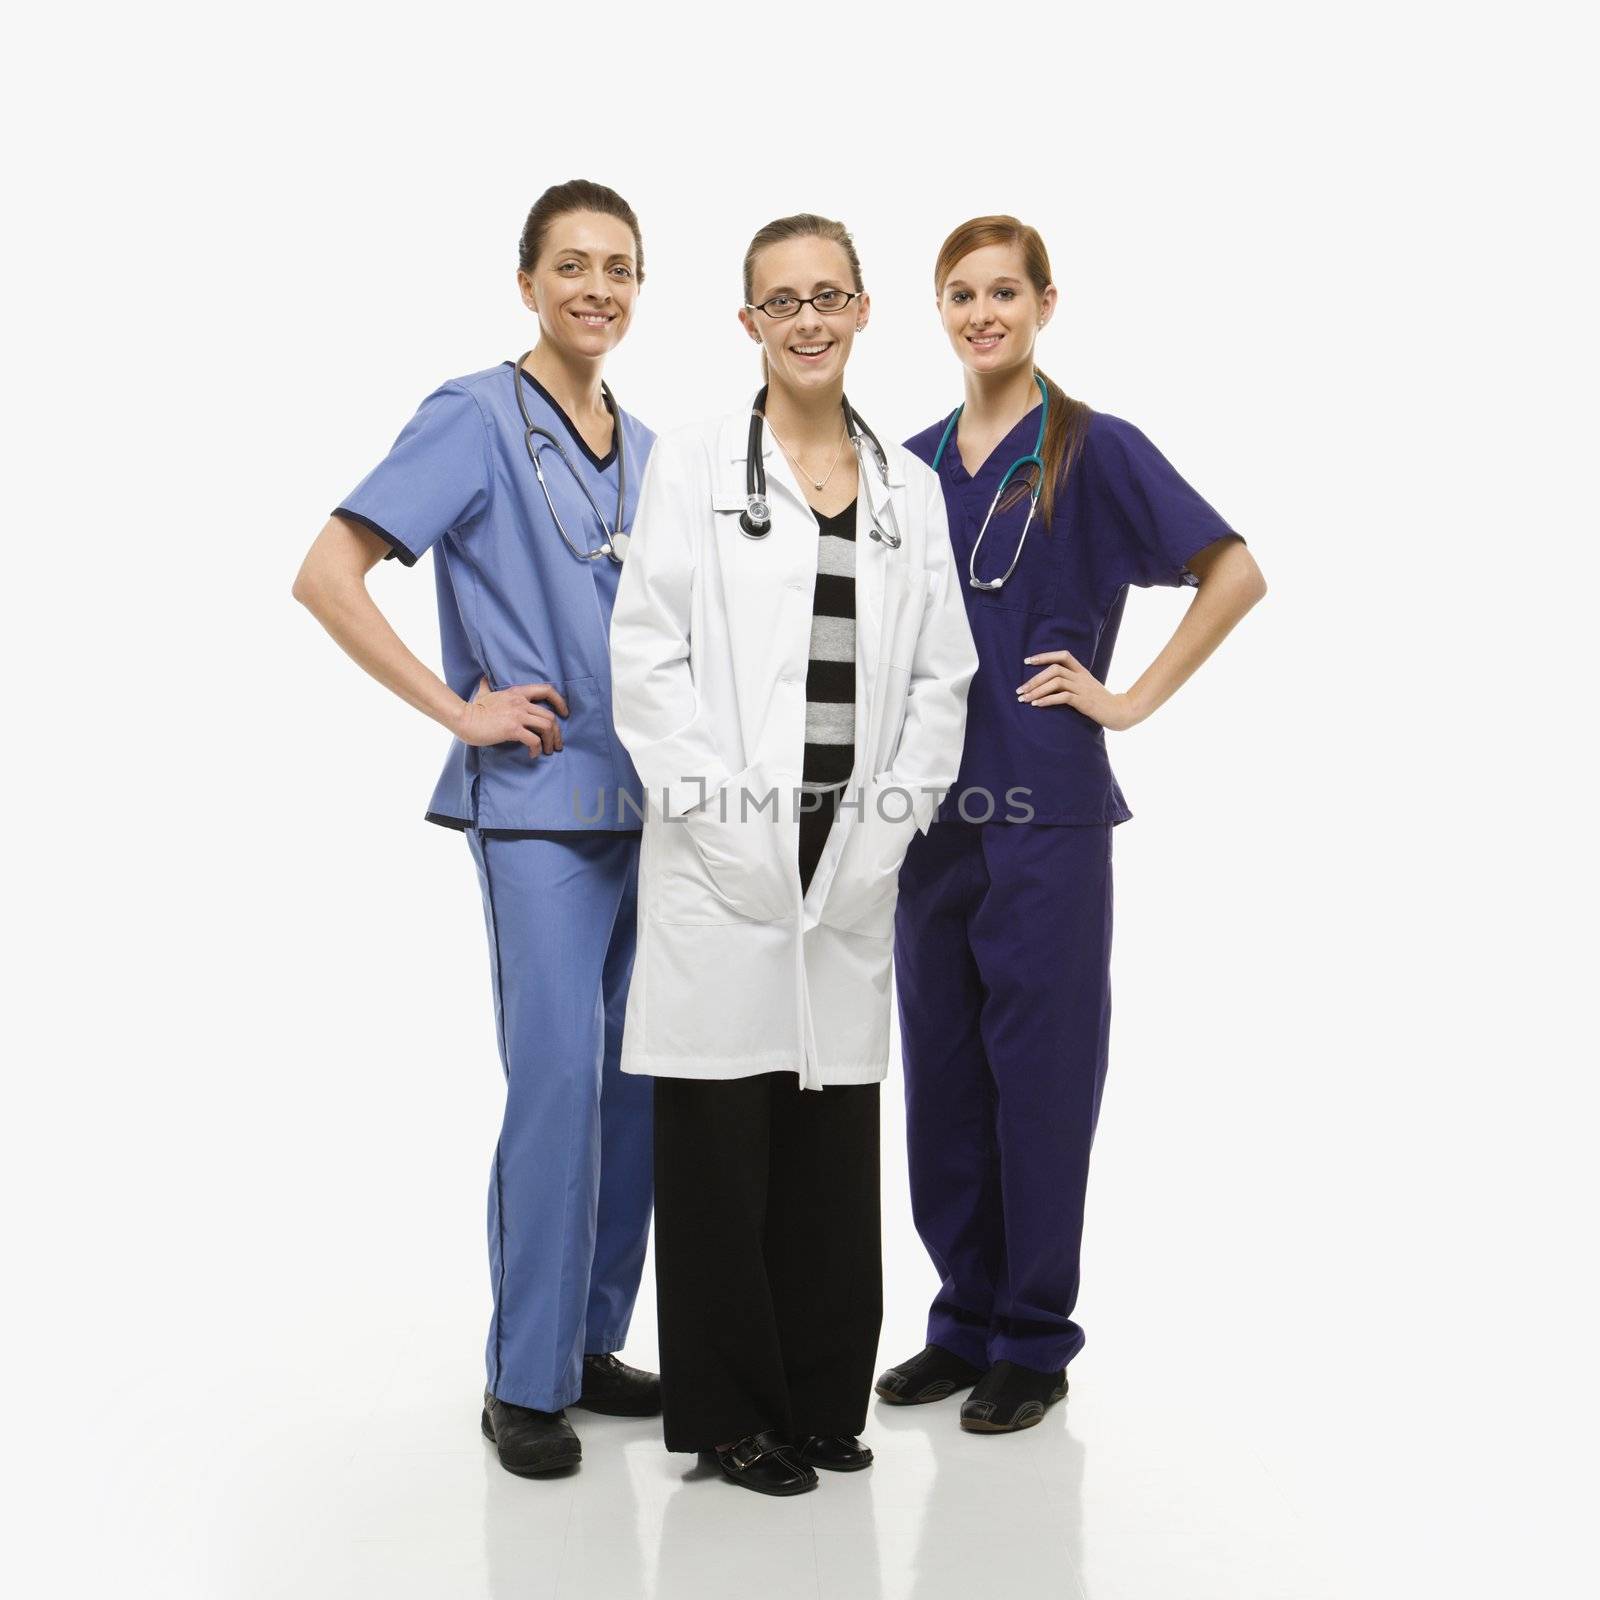 Portrait of smiling Caucasian women medical healthcare workers in uniforms standing against white background.